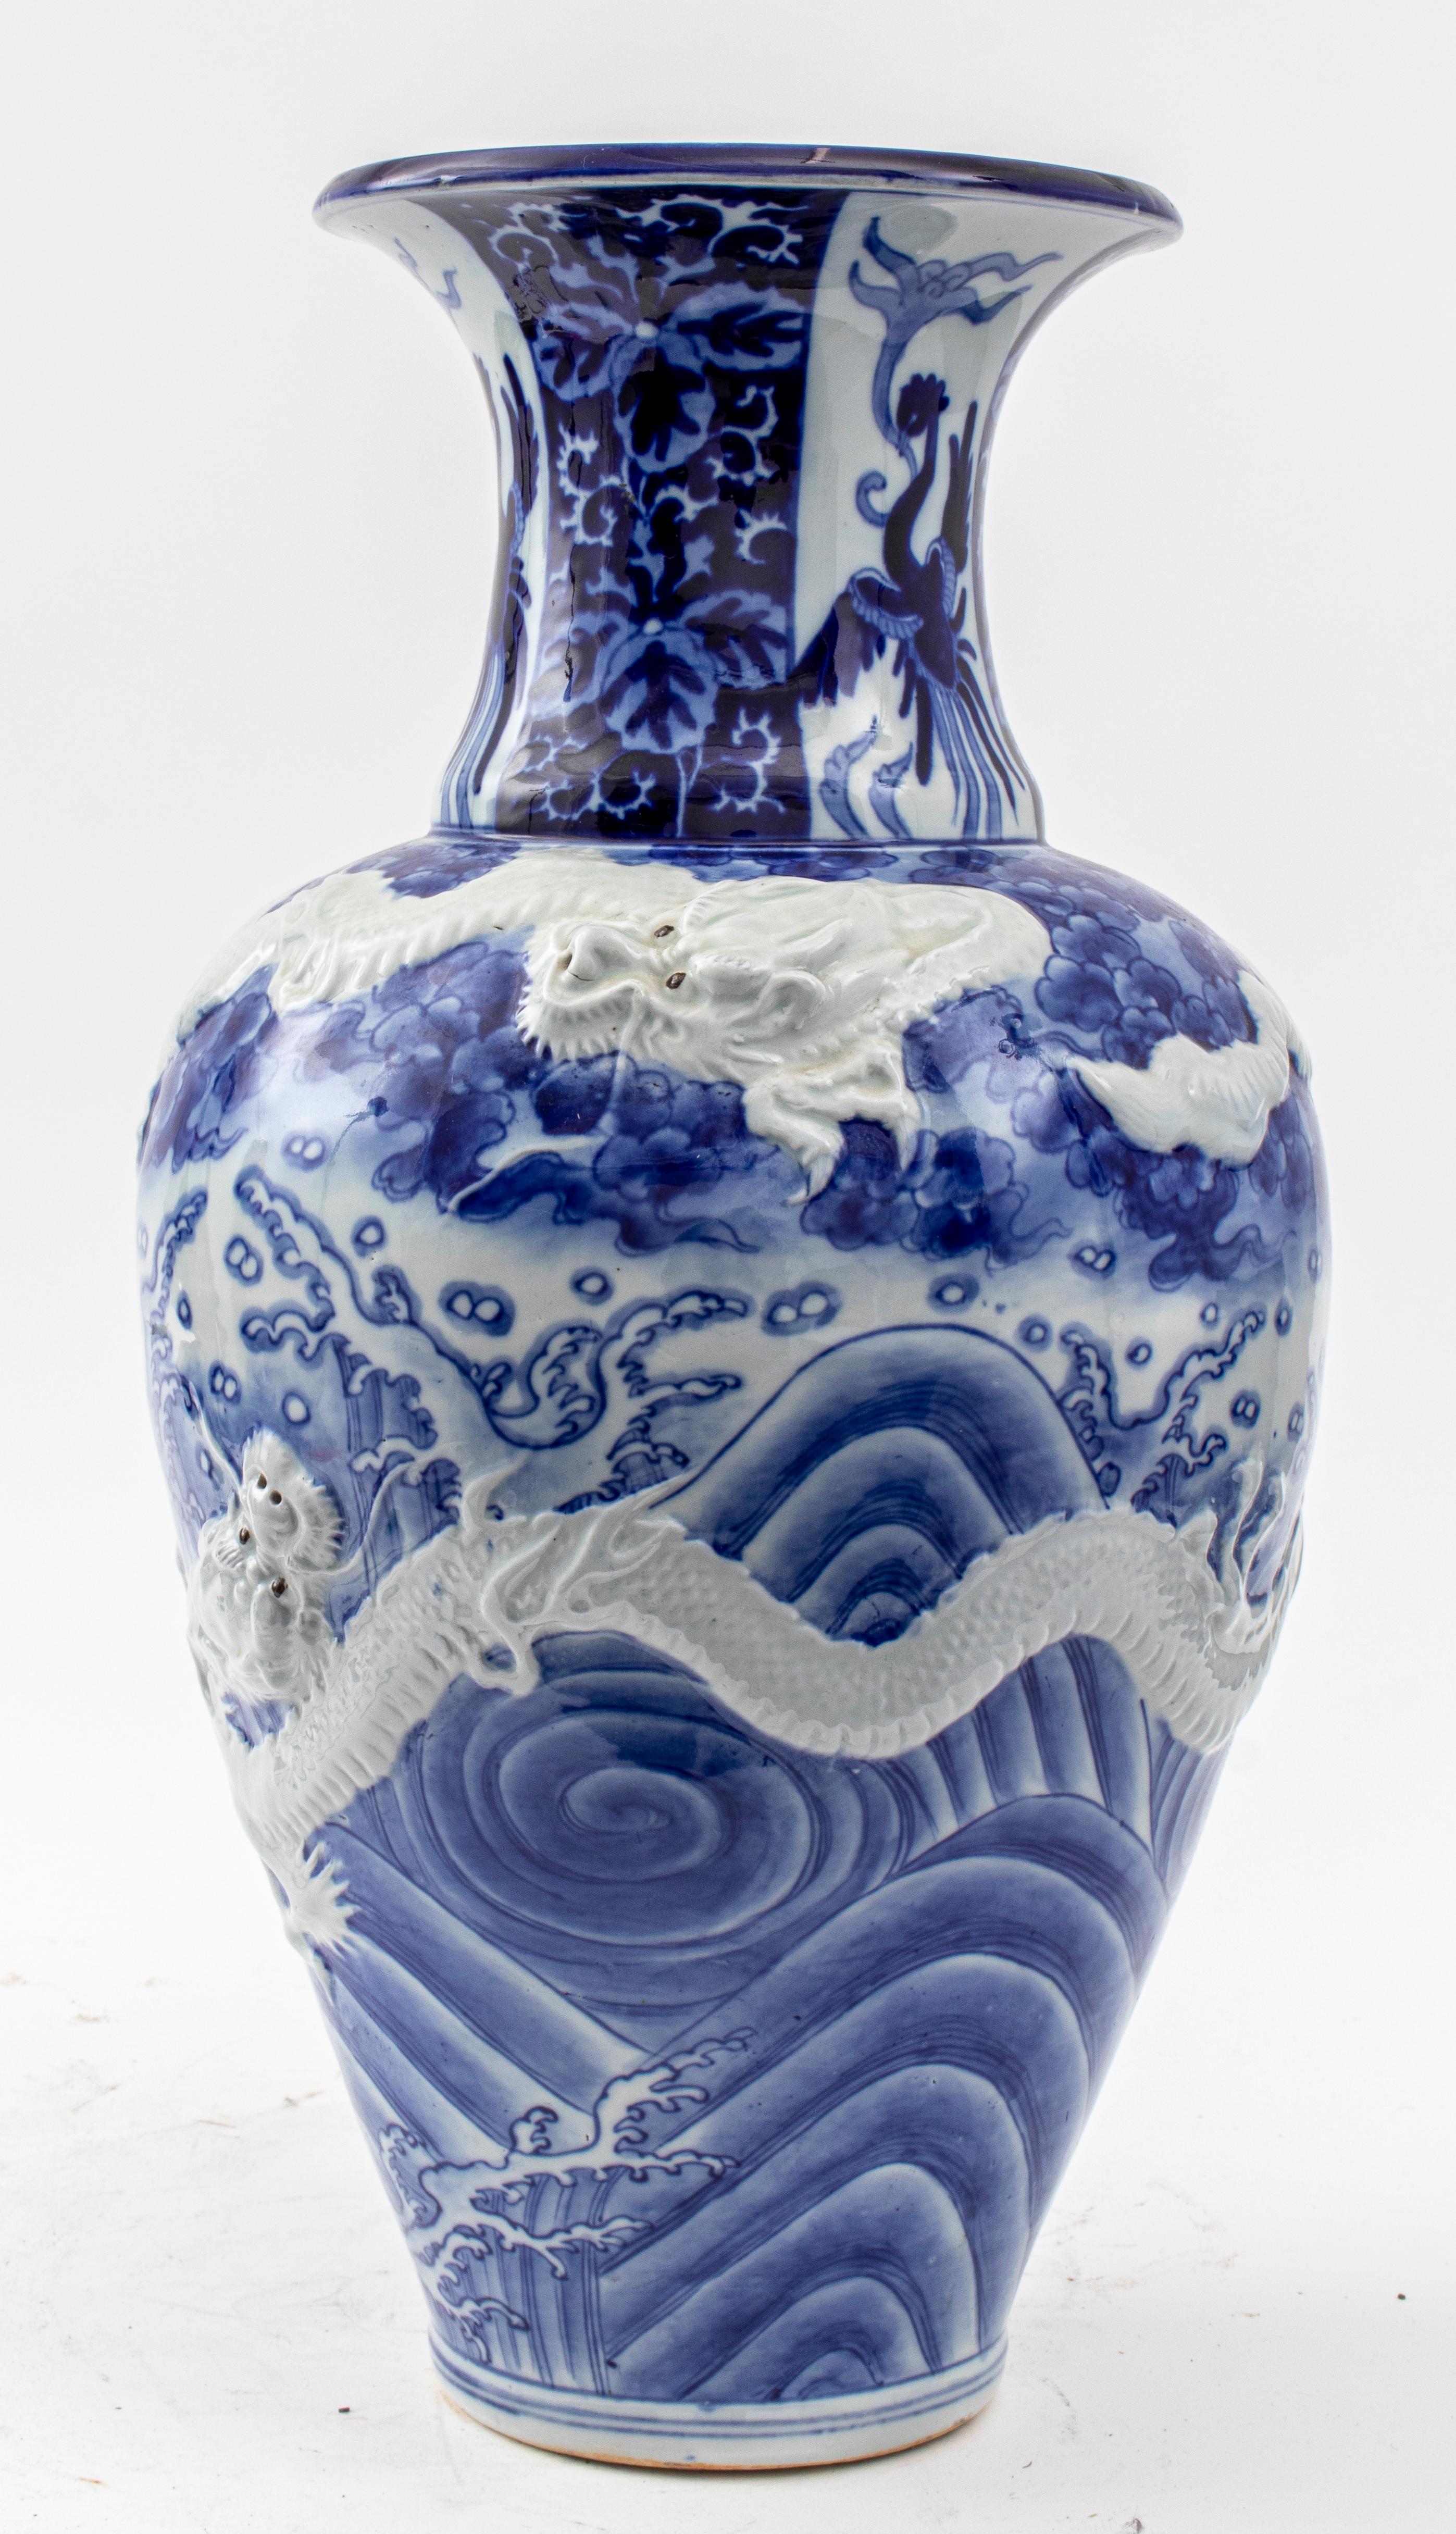 Large Chinese blue and white glazed ceramic pottery porcelain vase of begonia form decorated with two dragons in high relief amongst waves and clouds encircling the body and the neck painted with three phoenixes, scrolling foliate design upon the